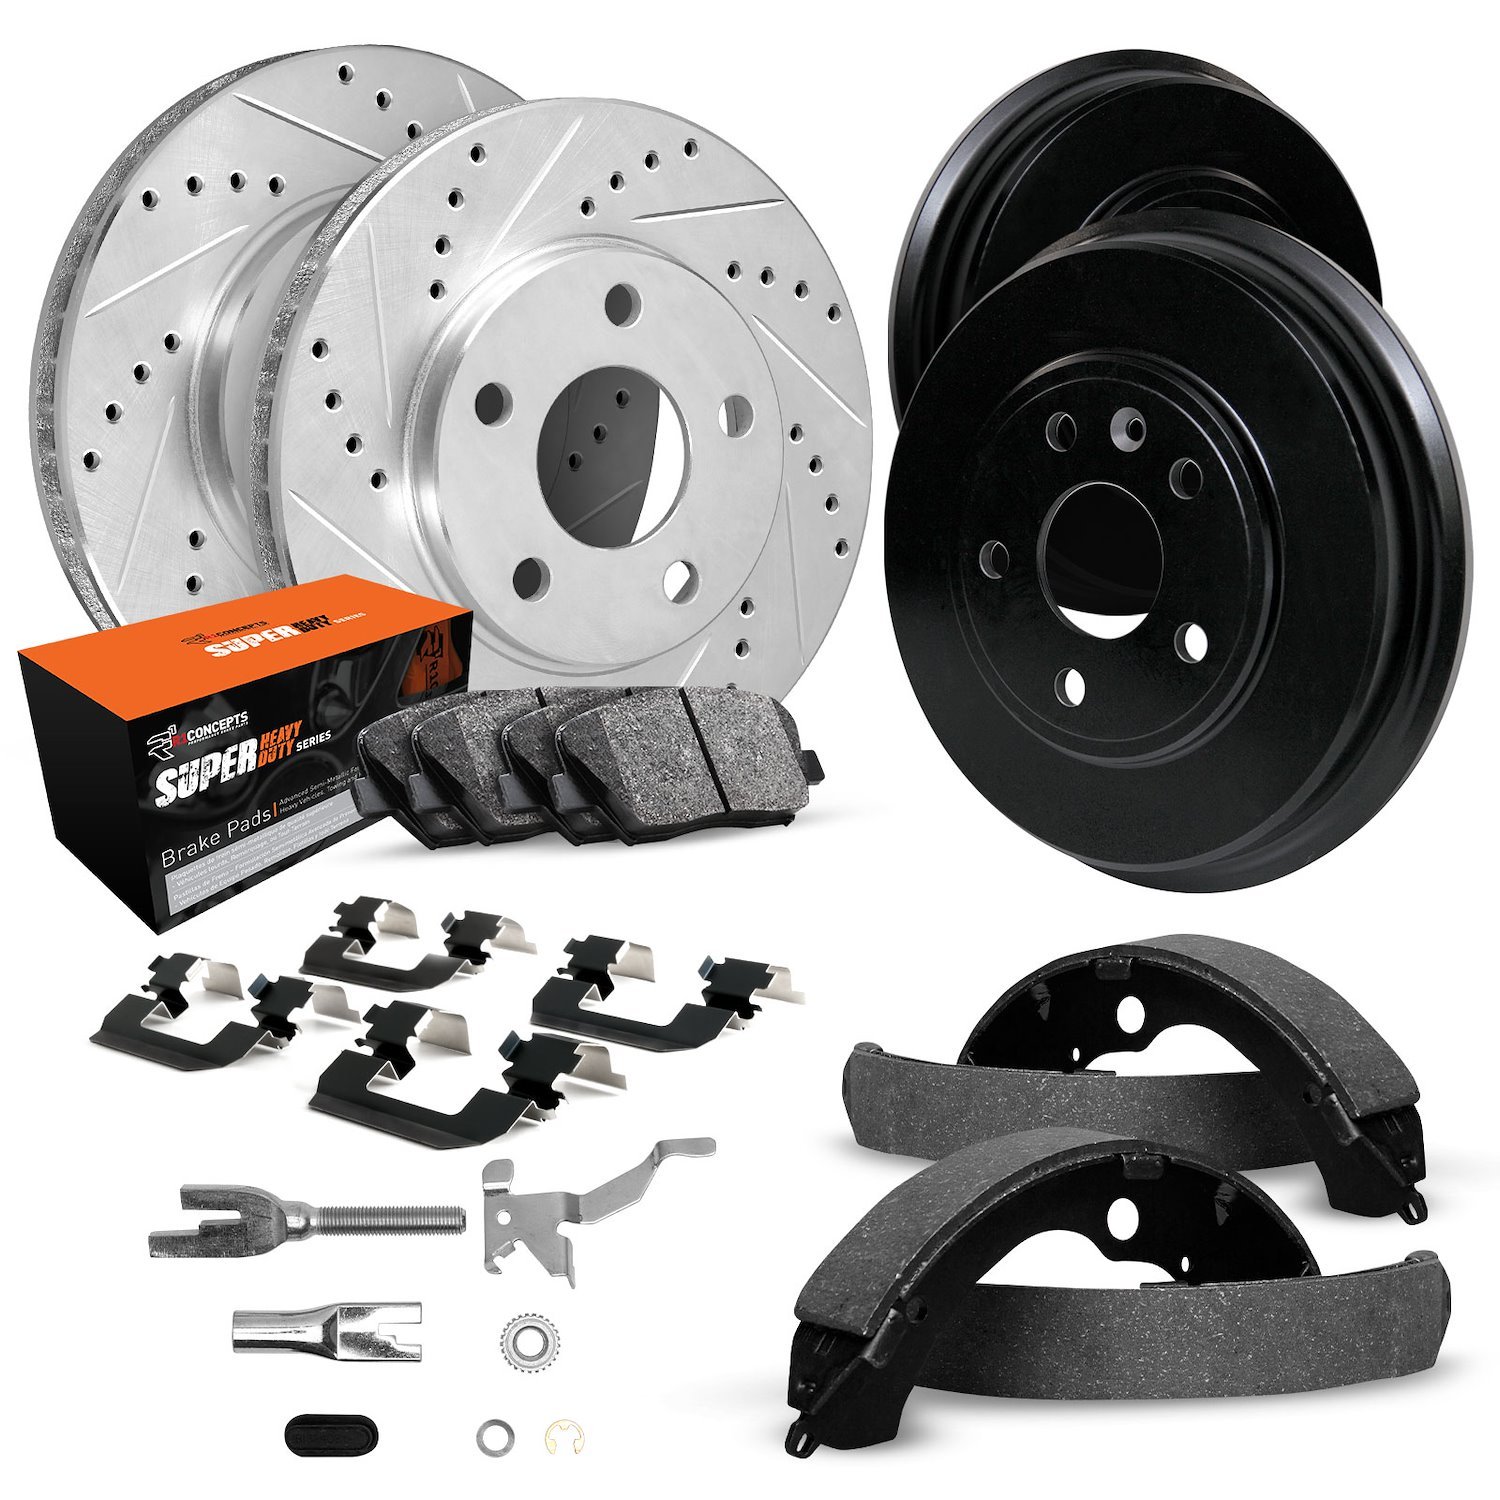 E-Line Drilled/Slotted Silver Rotor & Drum Set w/Super-Duty Pads, Shoes/Hardware/Adjusters, 1986-1986 Ford/Lincoln/Mercury/Mazda